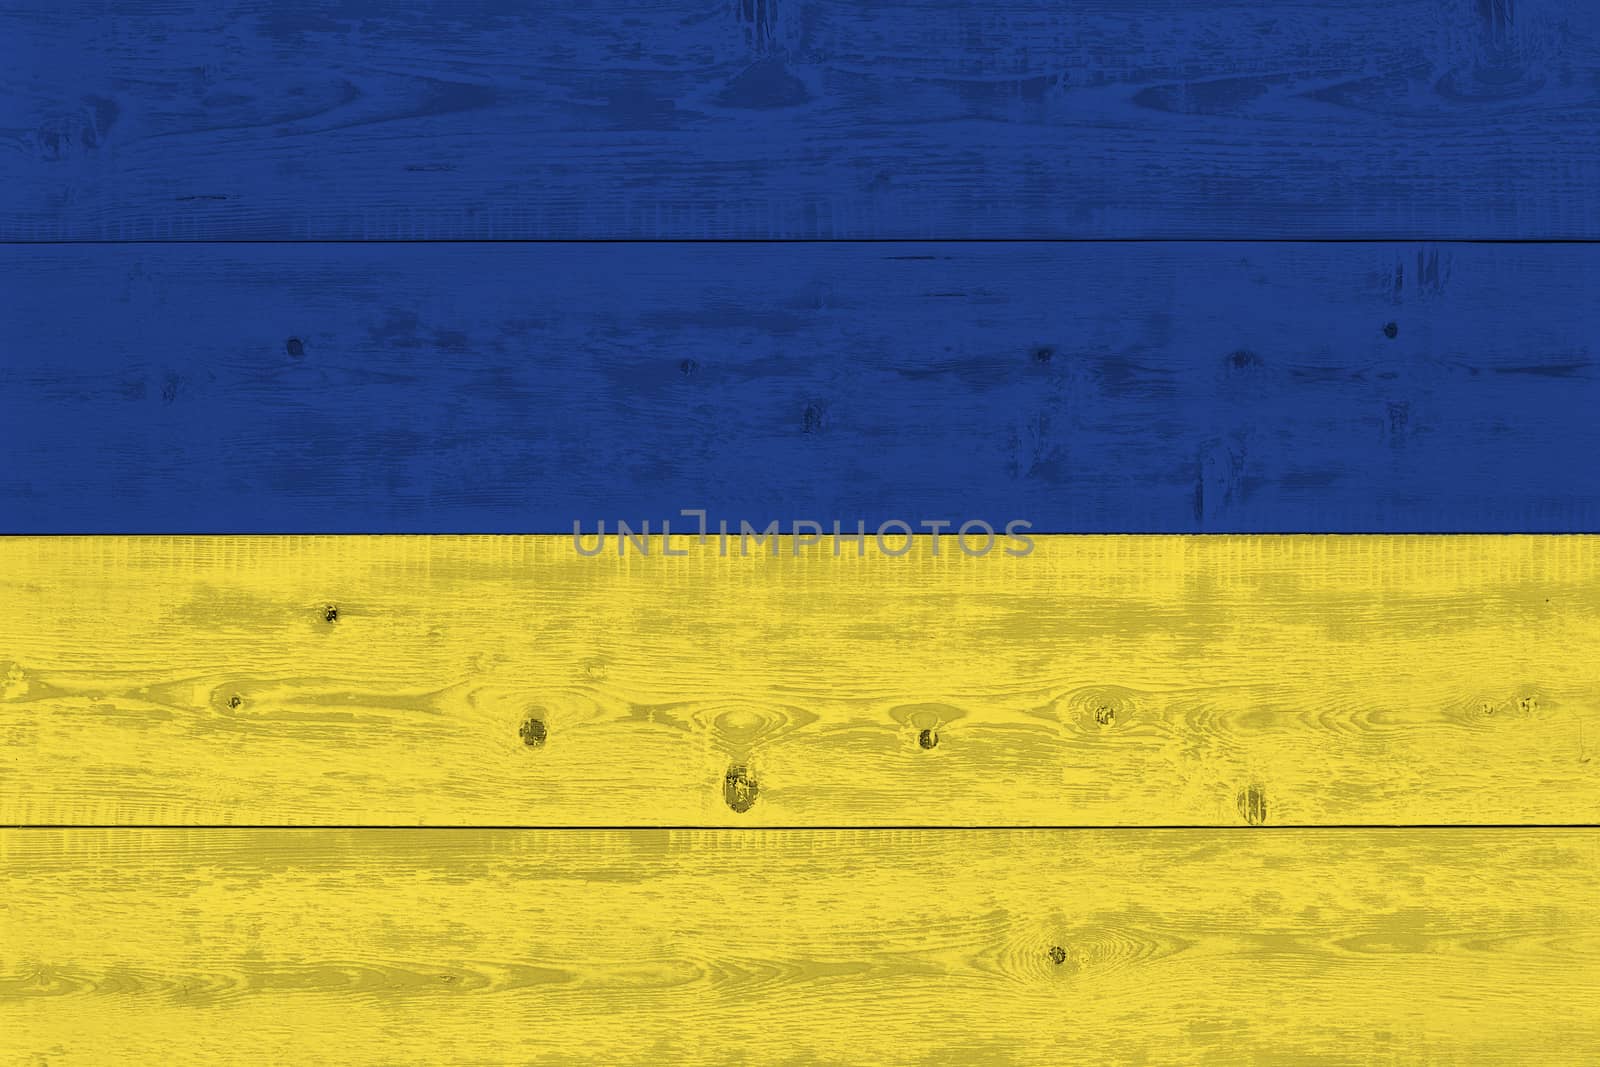 Ukraine flag painted on old wood plank by Visual-Content